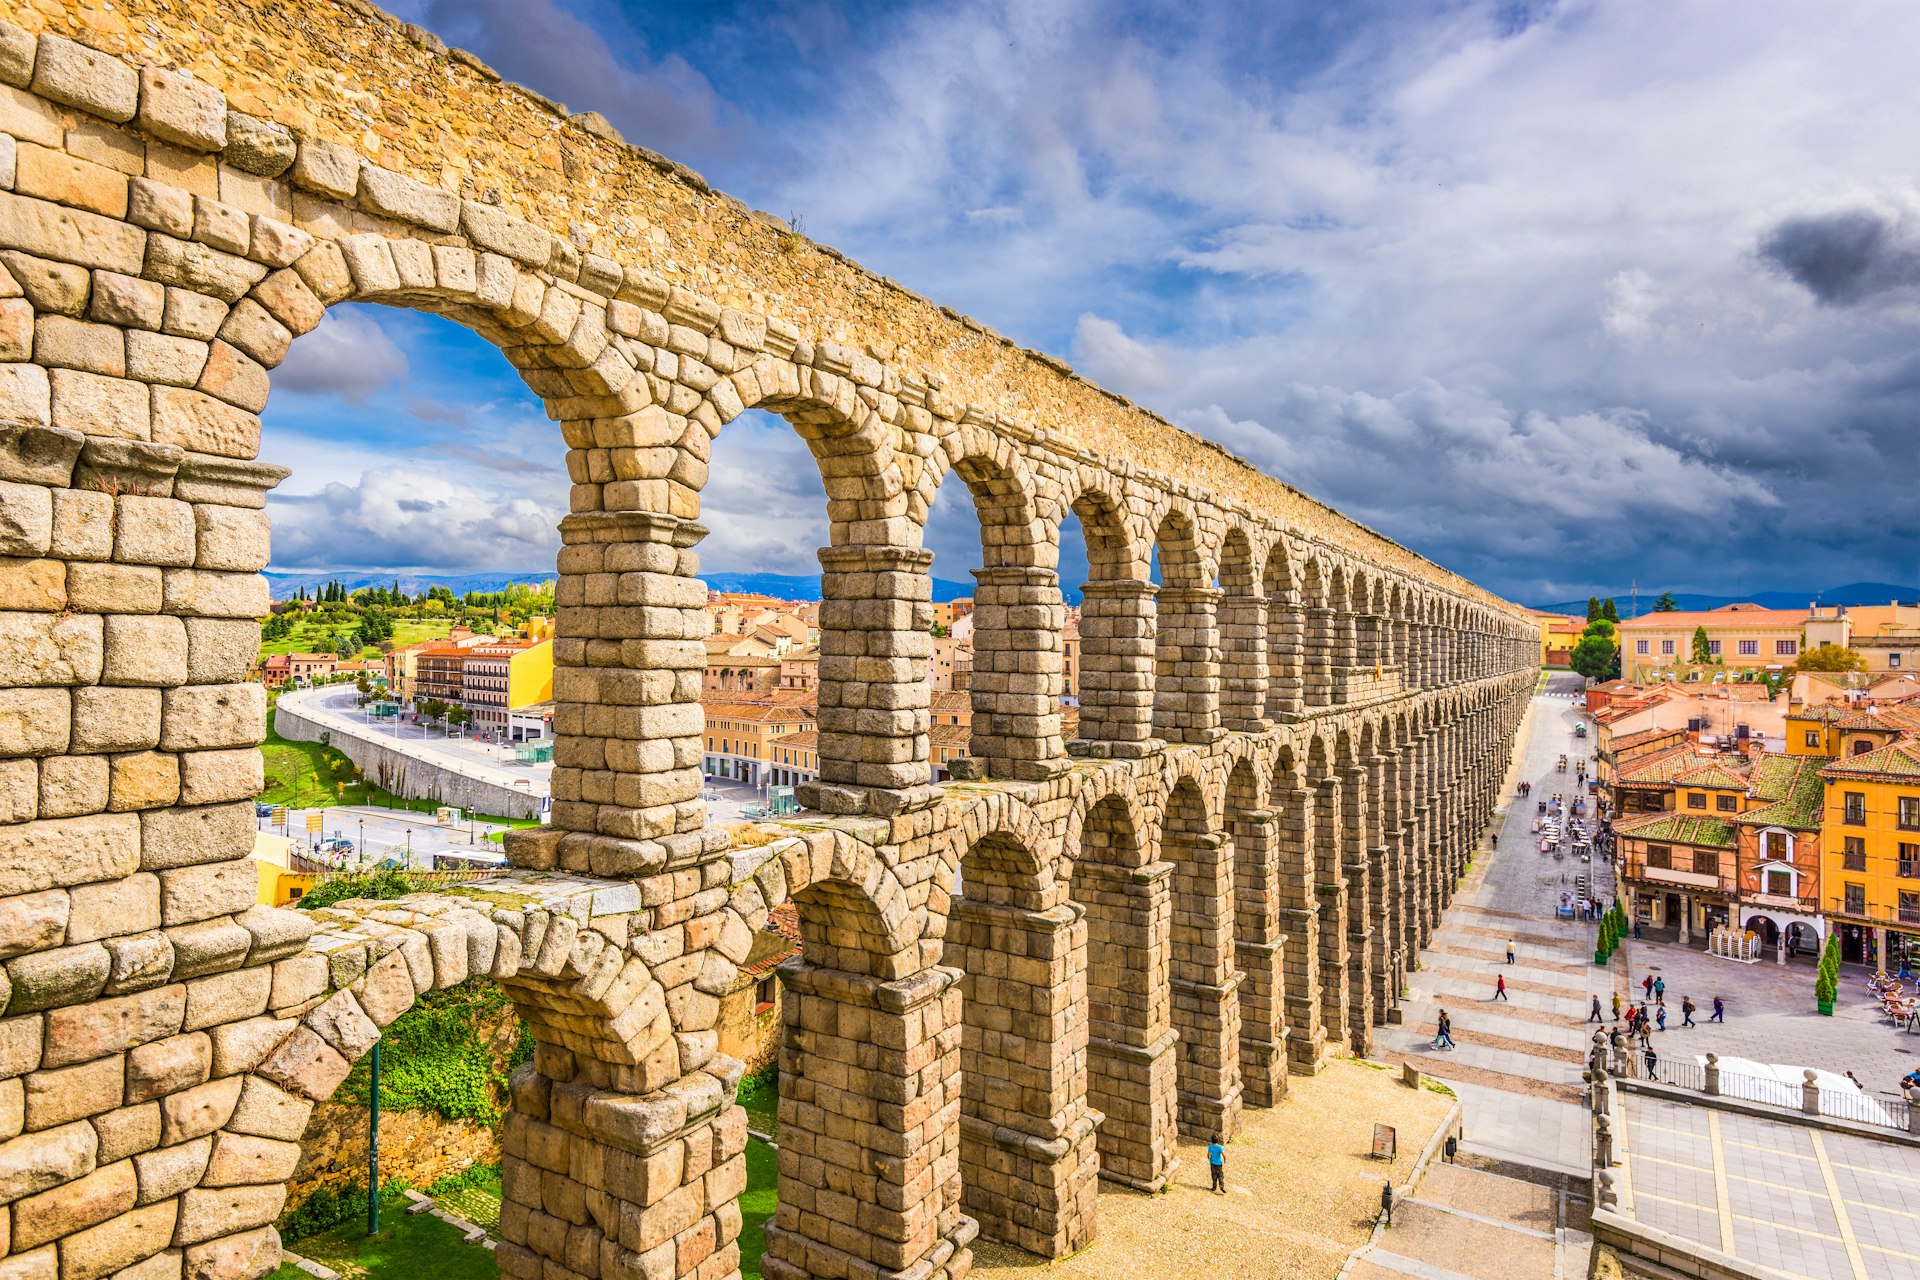 Sandstone-colored tall aqueduct lining a city square 